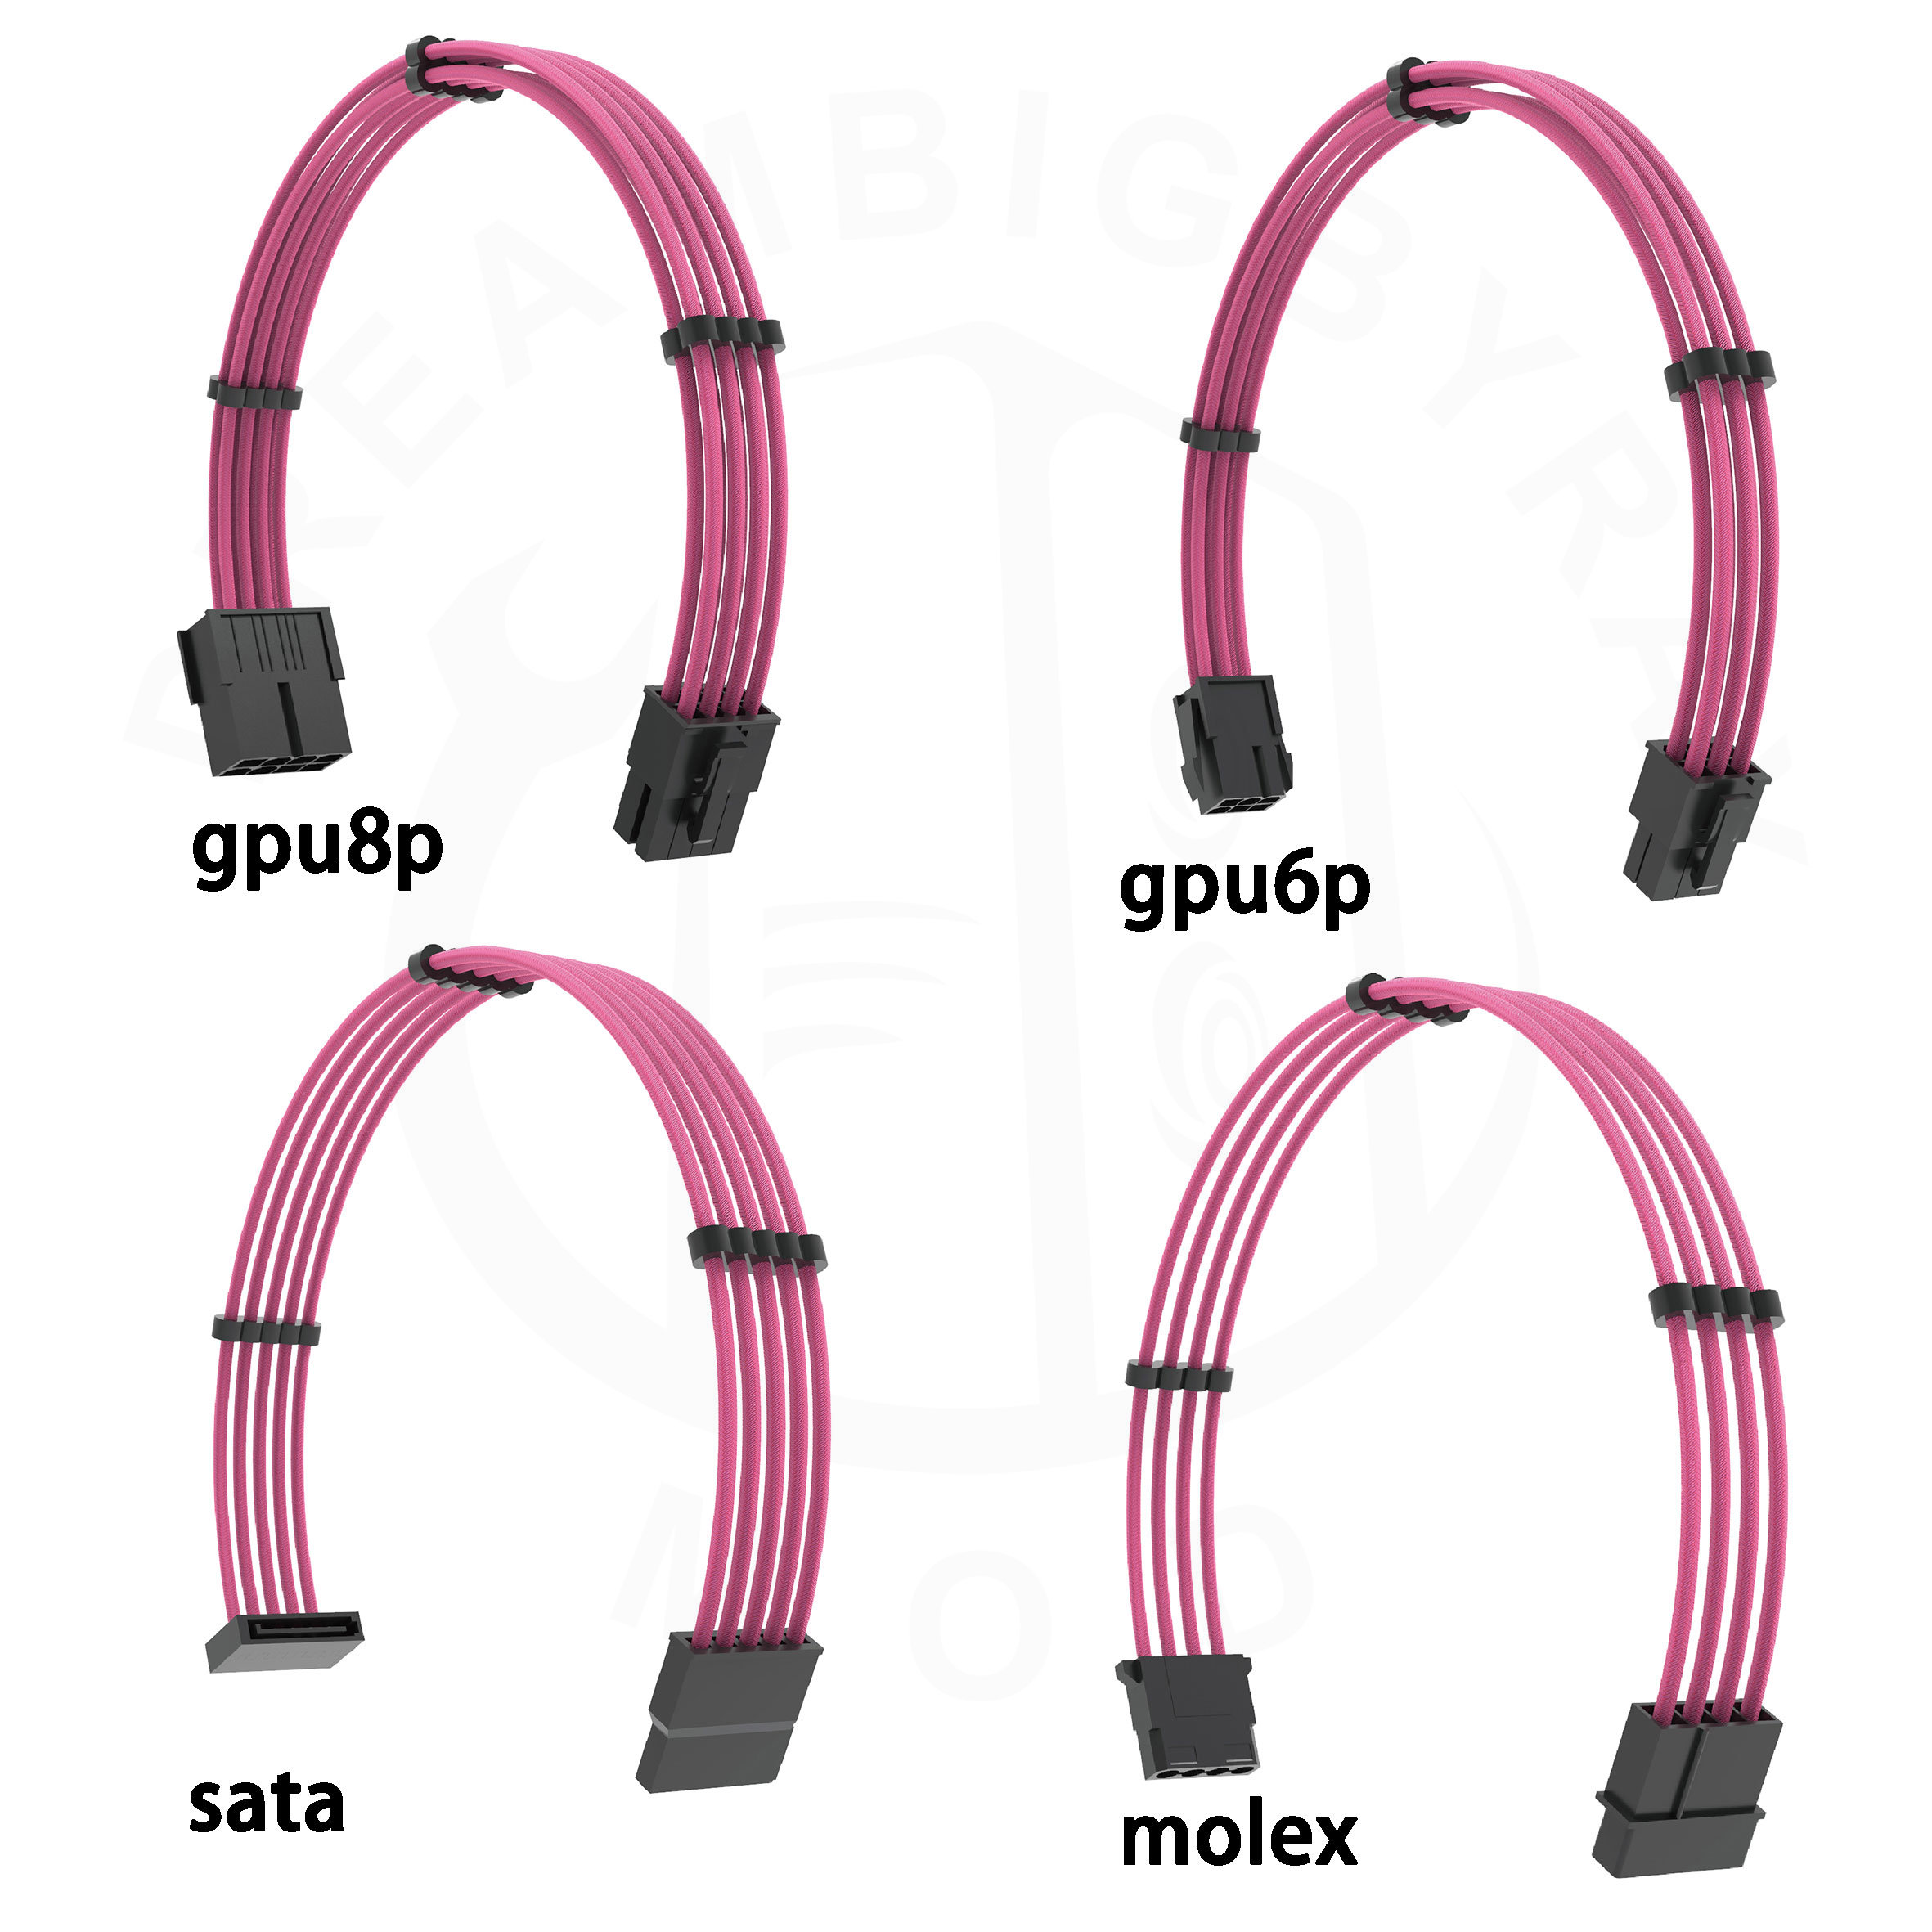 Cable Length: 30cm Occus 50pcs/Lot 30cm Dark Gray Sleeved UL 1007 18AWG Wire for PC ATX/EPS Power Extension Cable Occus